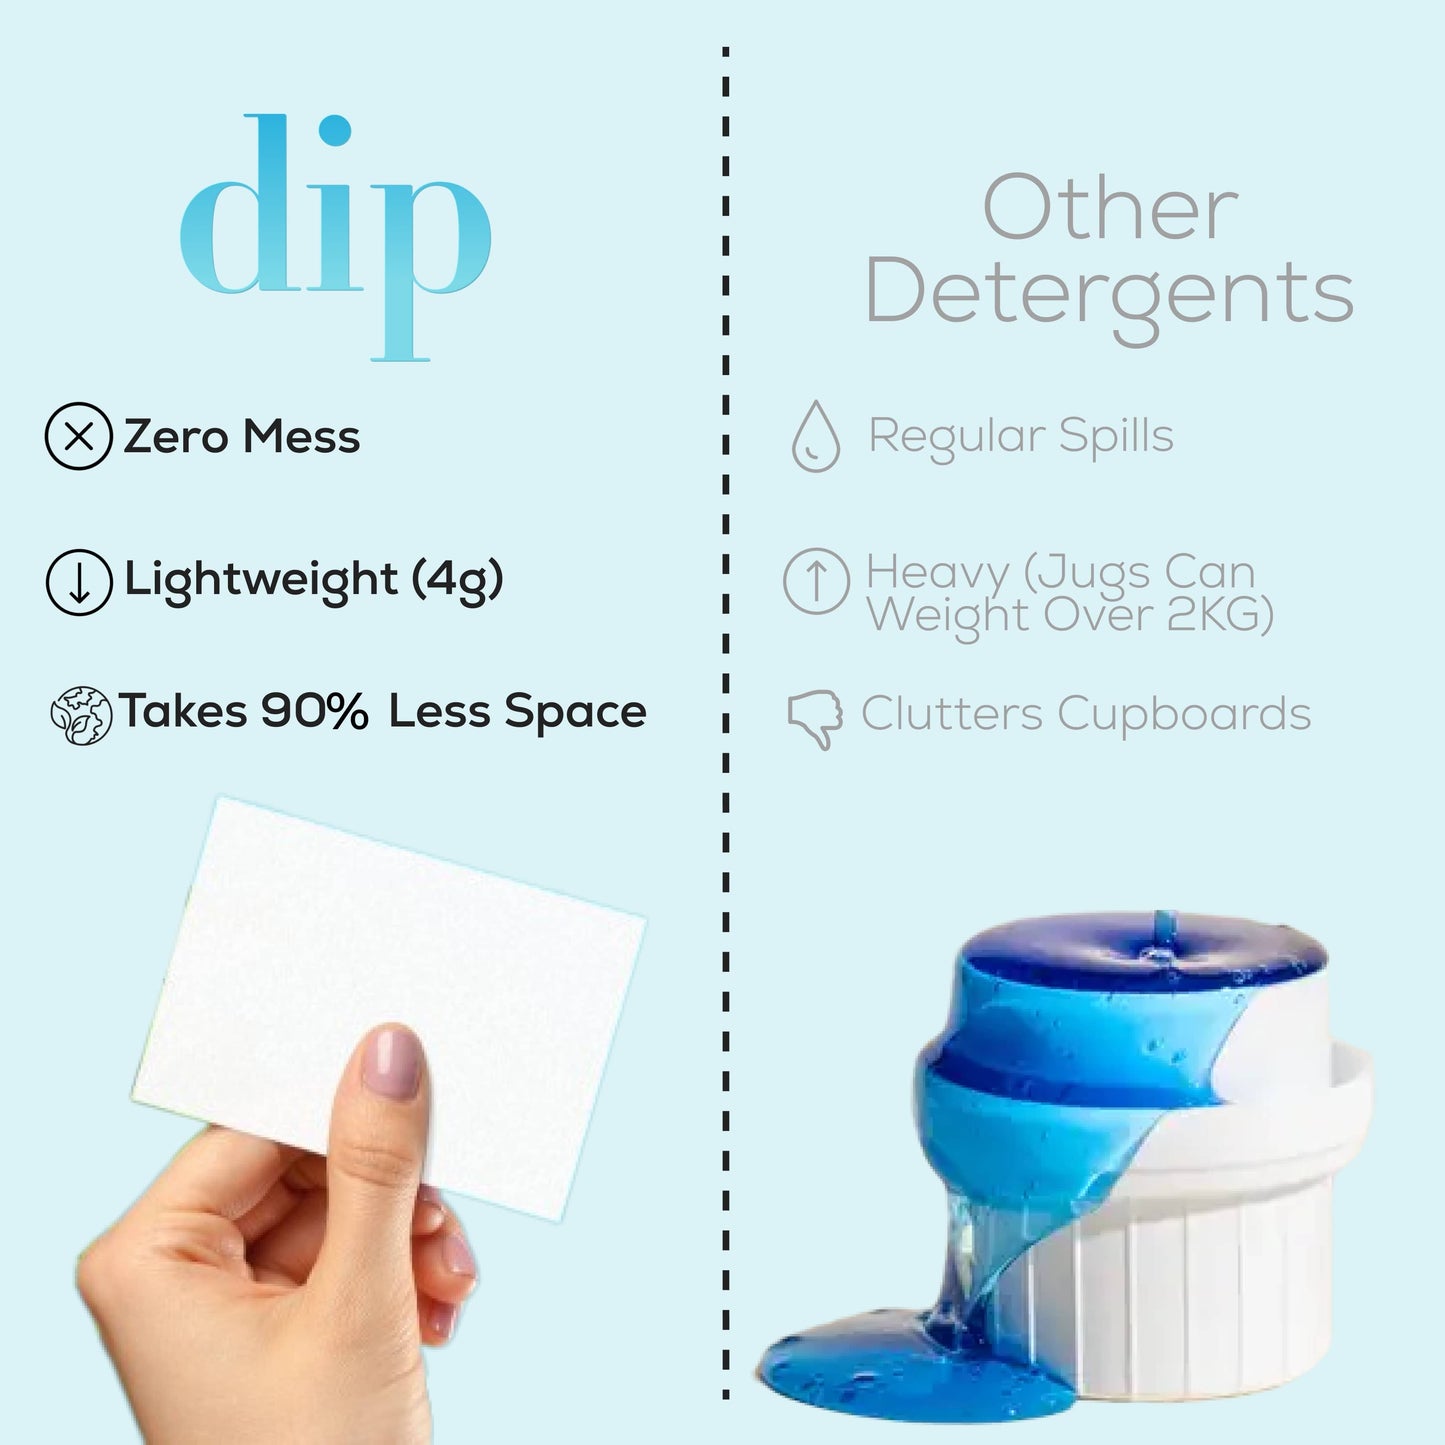 Dip Laundry Detergent Sheets Cleans Better, Easier To Use, Smells Nicer and Good For The Planet